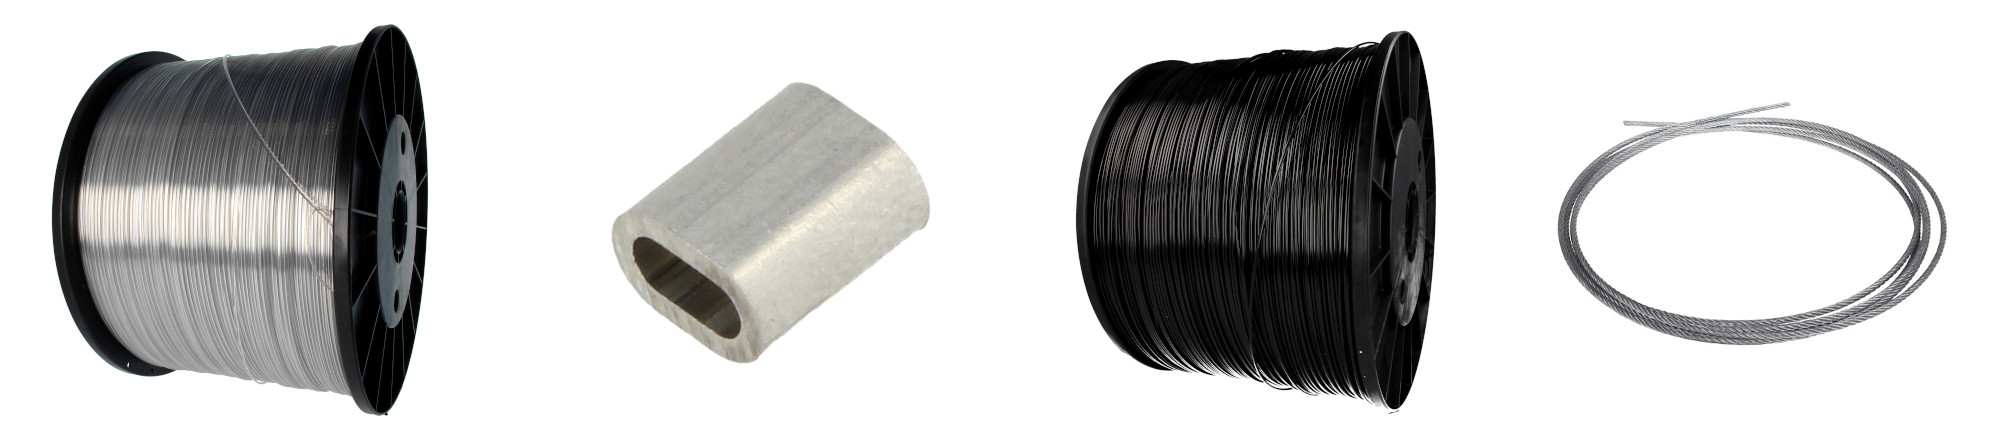 Polyester wires and cables